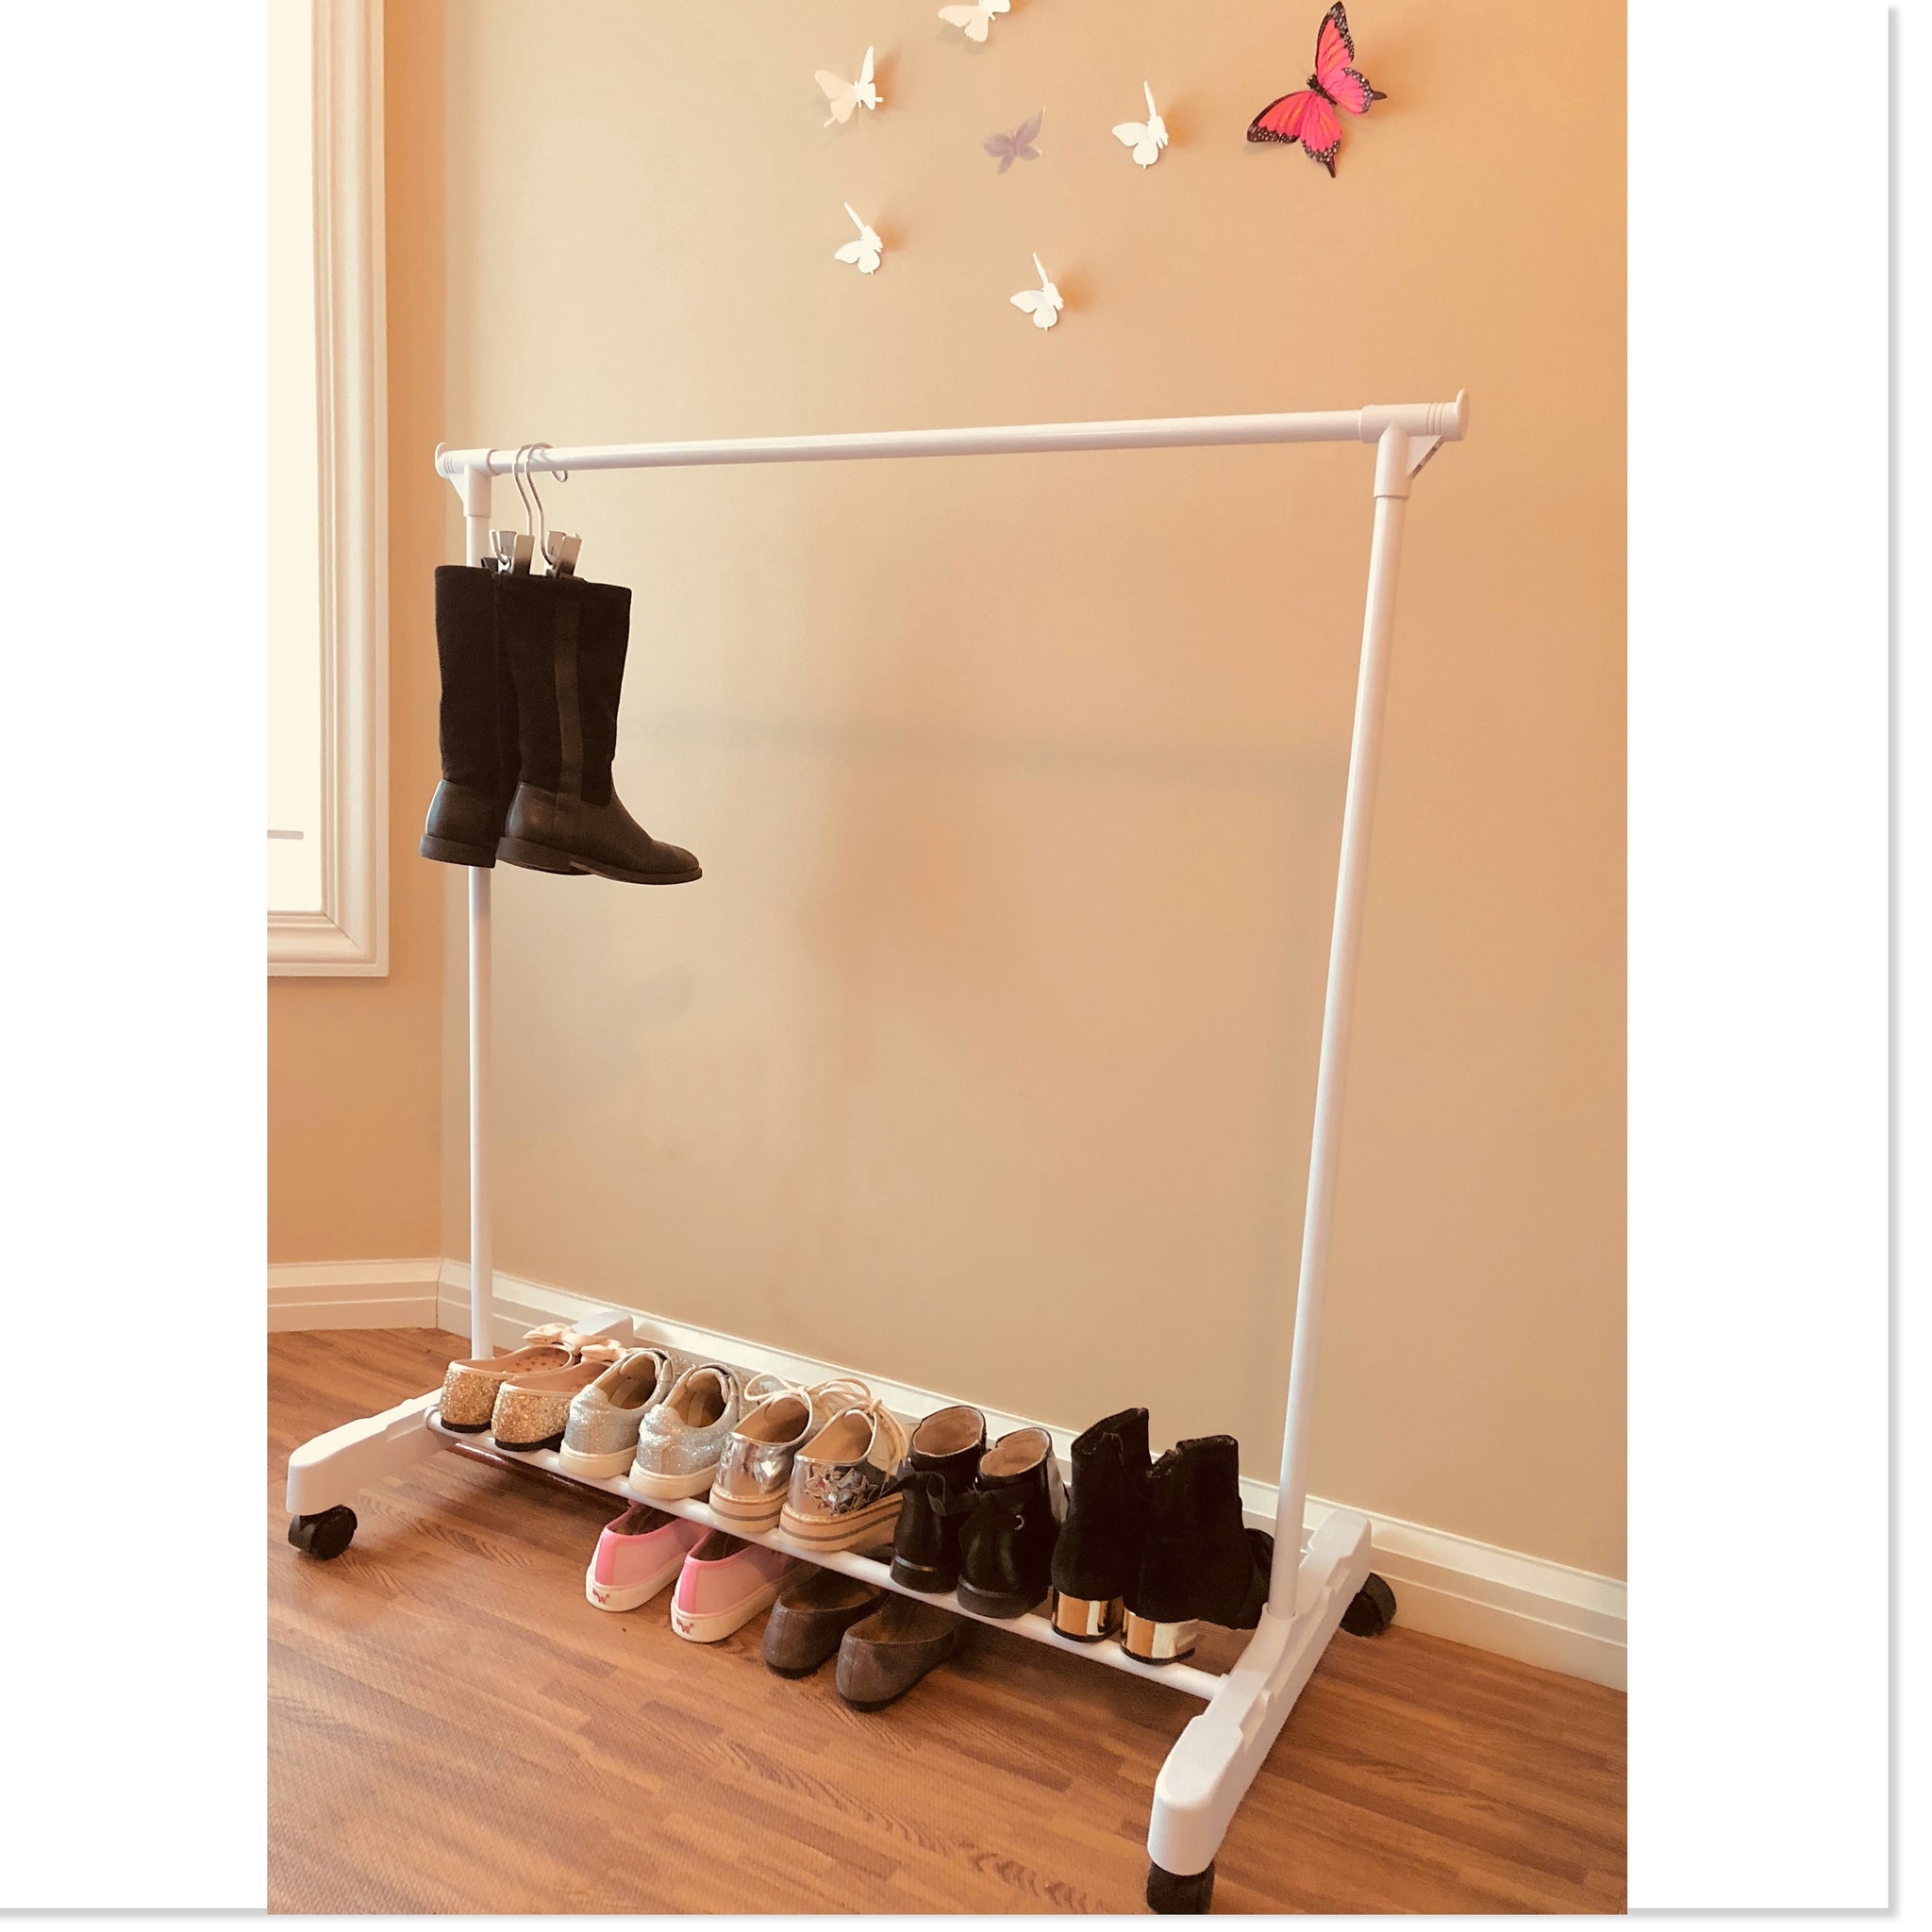 https://boottique.com/cdn/shop/products/New_Child_Garment_Rack_2018_Kids_Clothing_Shoes_and_Boots_Image-_Kids_Garment_Rack_Dress_up_Rack_Childrens_Clothing_Storage-_Square_1a294278-0e73-48d5-9a6c-5d86d781e70b_2048x.jpg?v=1558454562